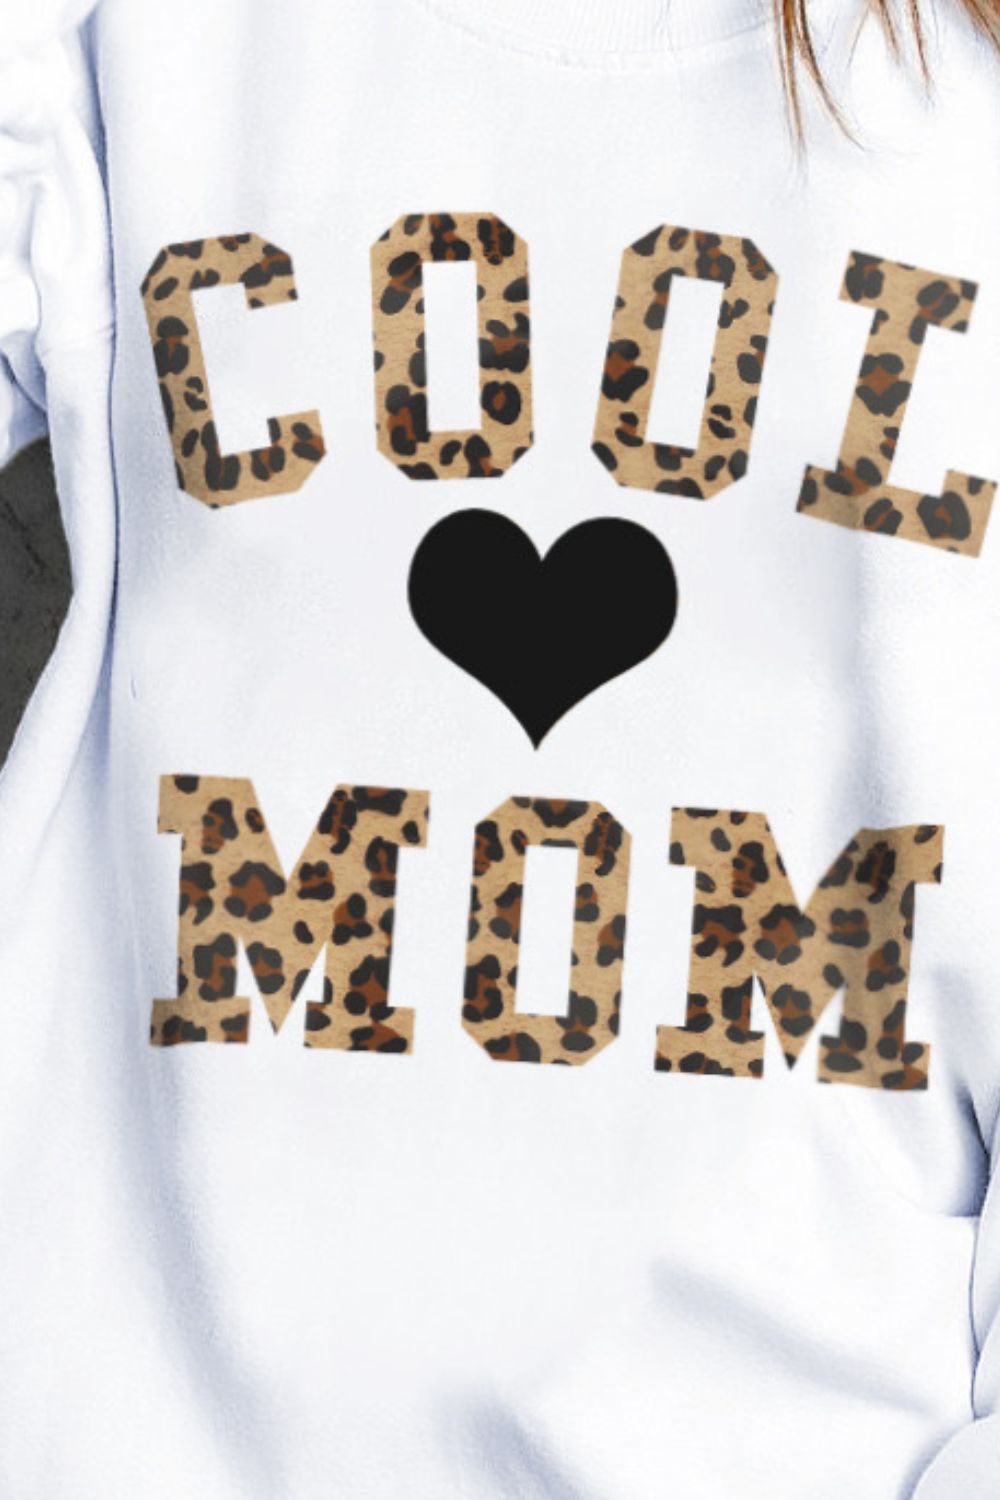 Leopard COOL MOM Heart Graphic Pullover Sweatshirt Top (Plus Size Available)